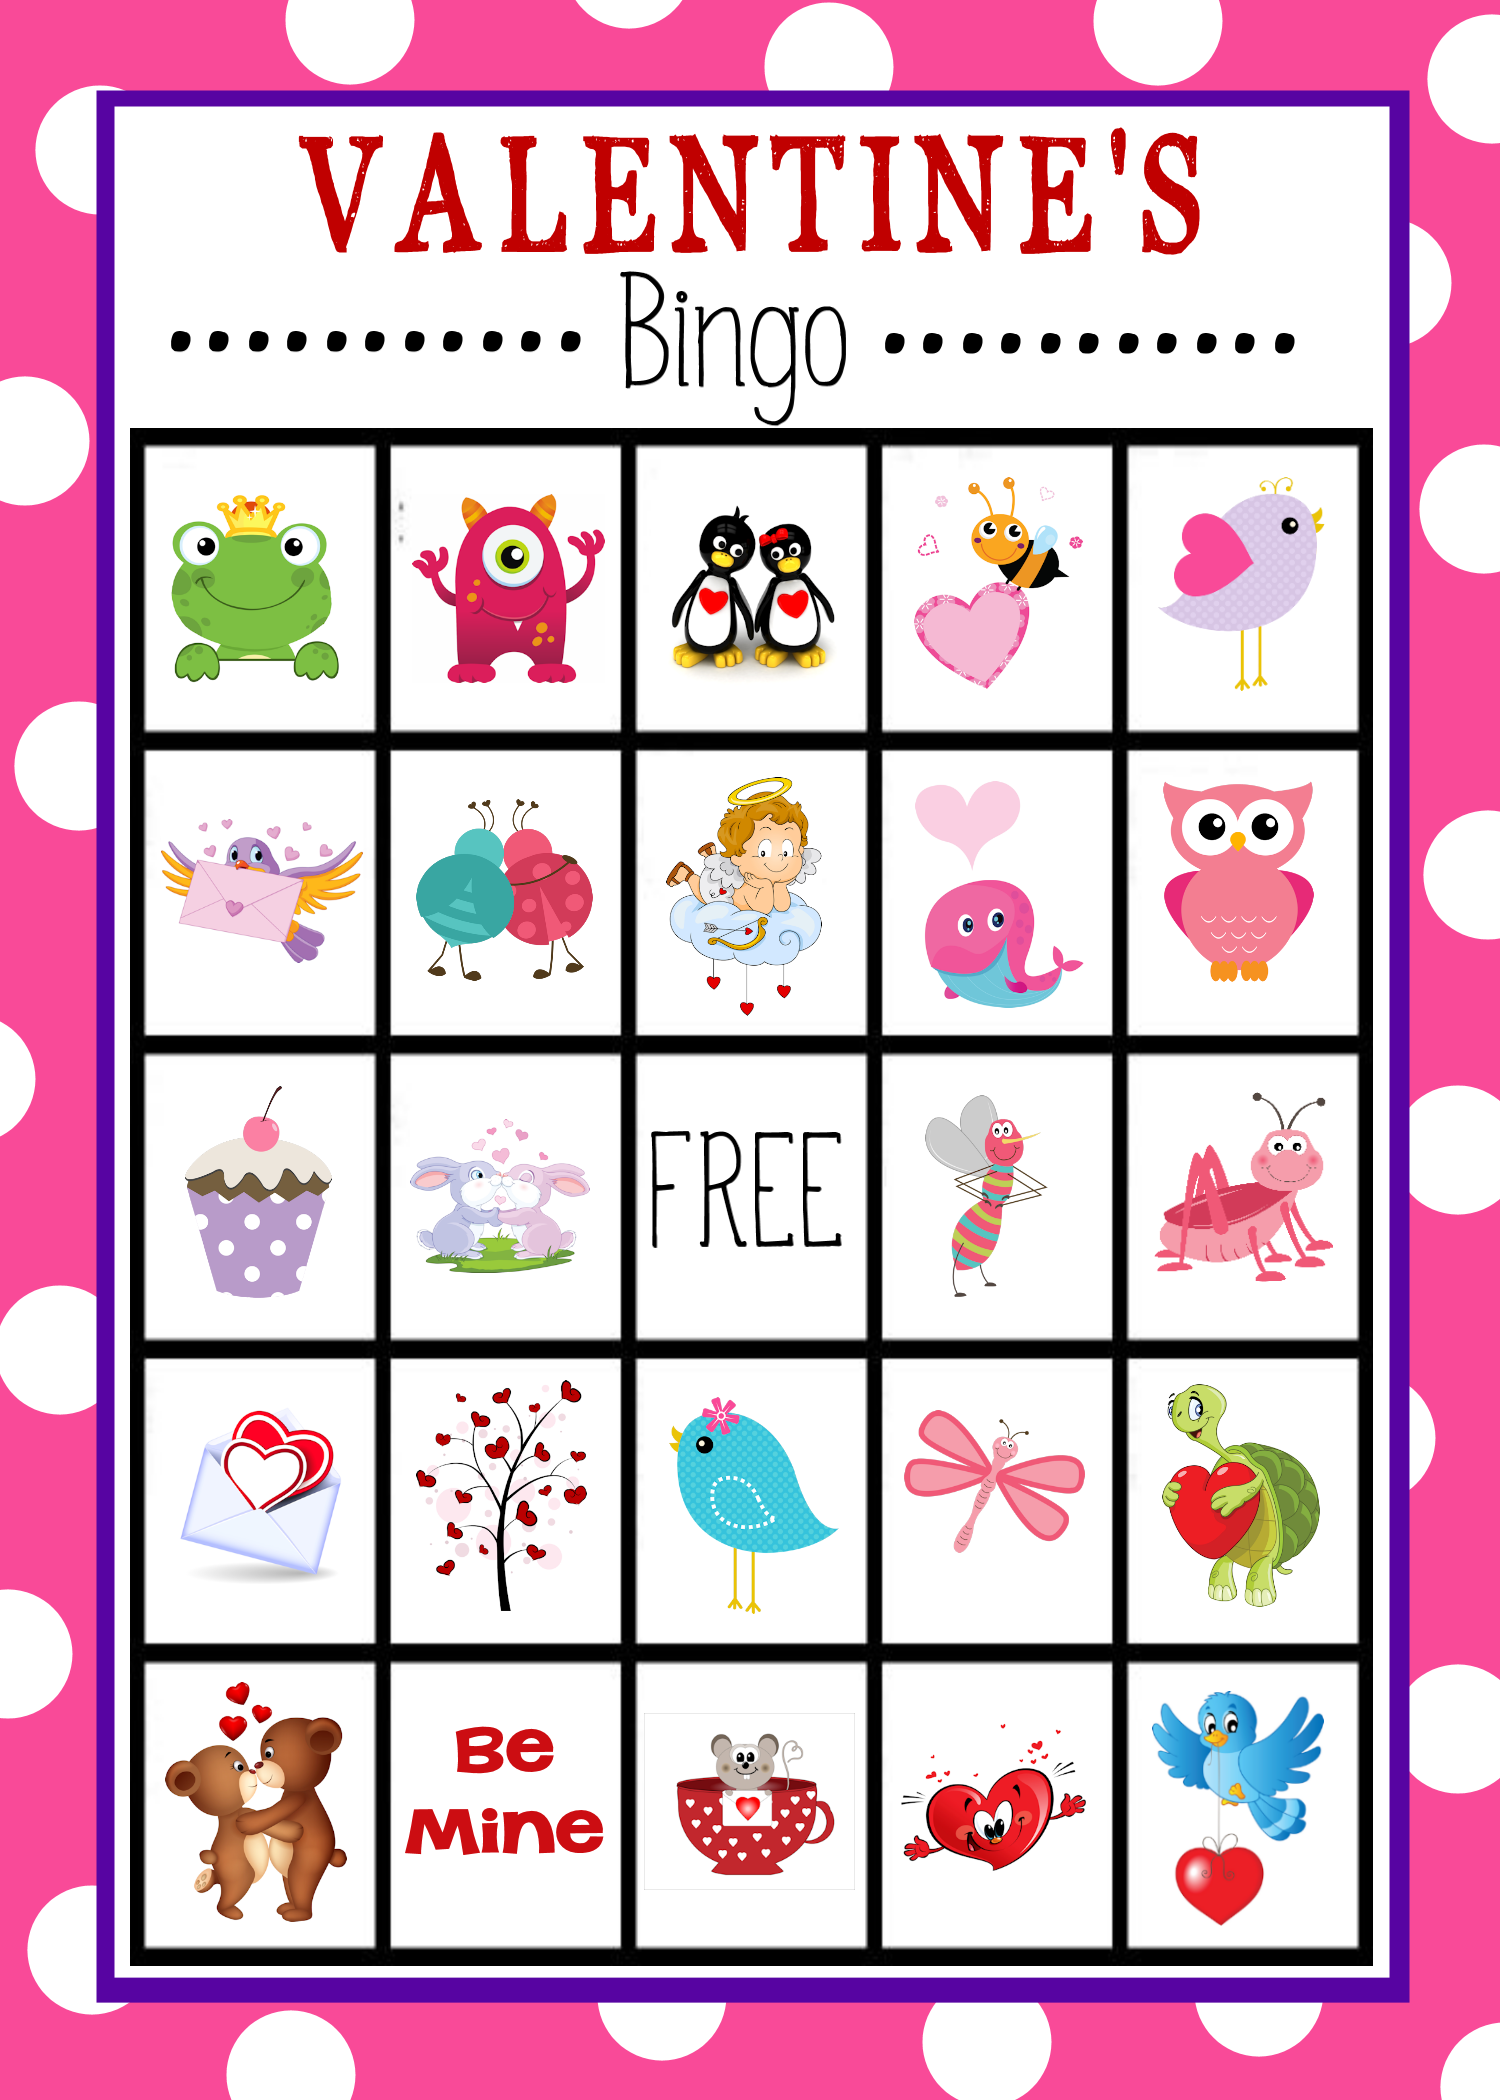 Game Printable Images Gallery Category Page 27 - printablee.com1500 x 2100